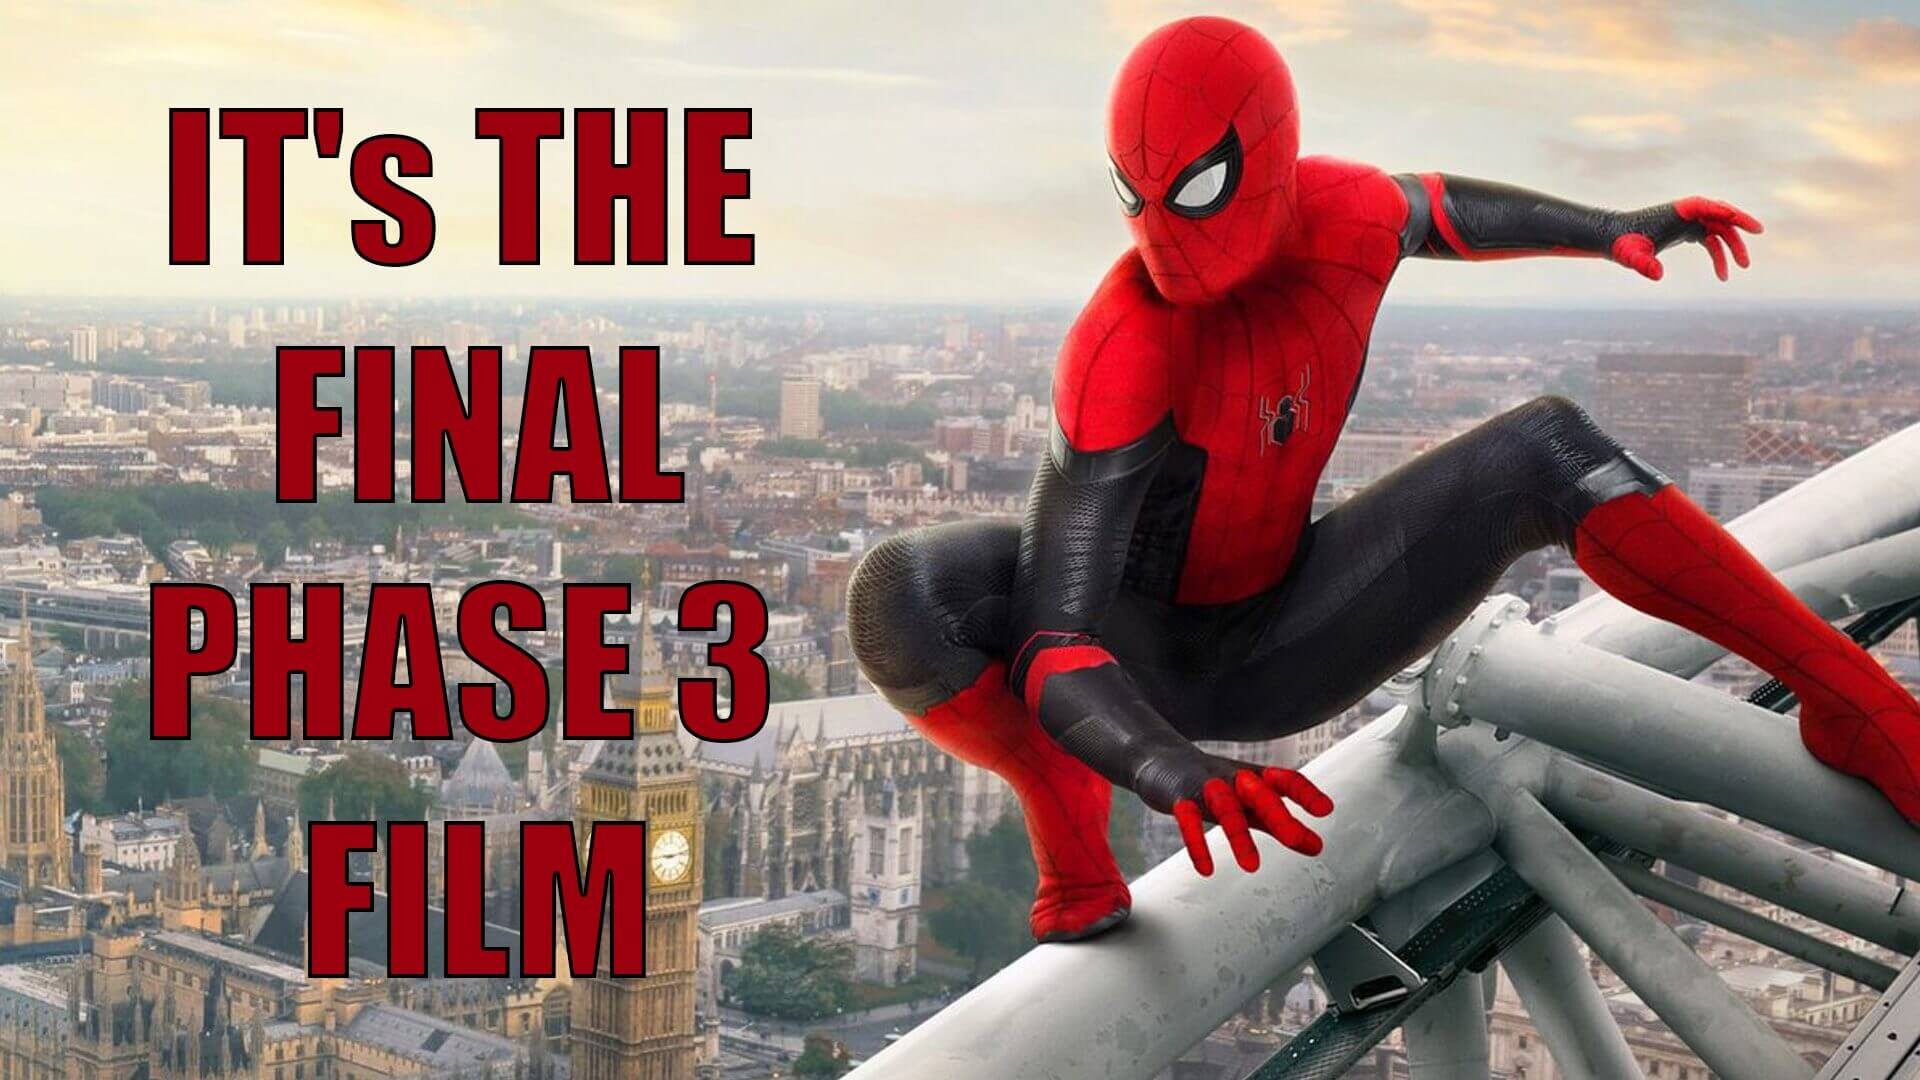 Top 10 Facts About Spider Man Far From Home - What Movies To Watch Before Spider-man: Far From Home